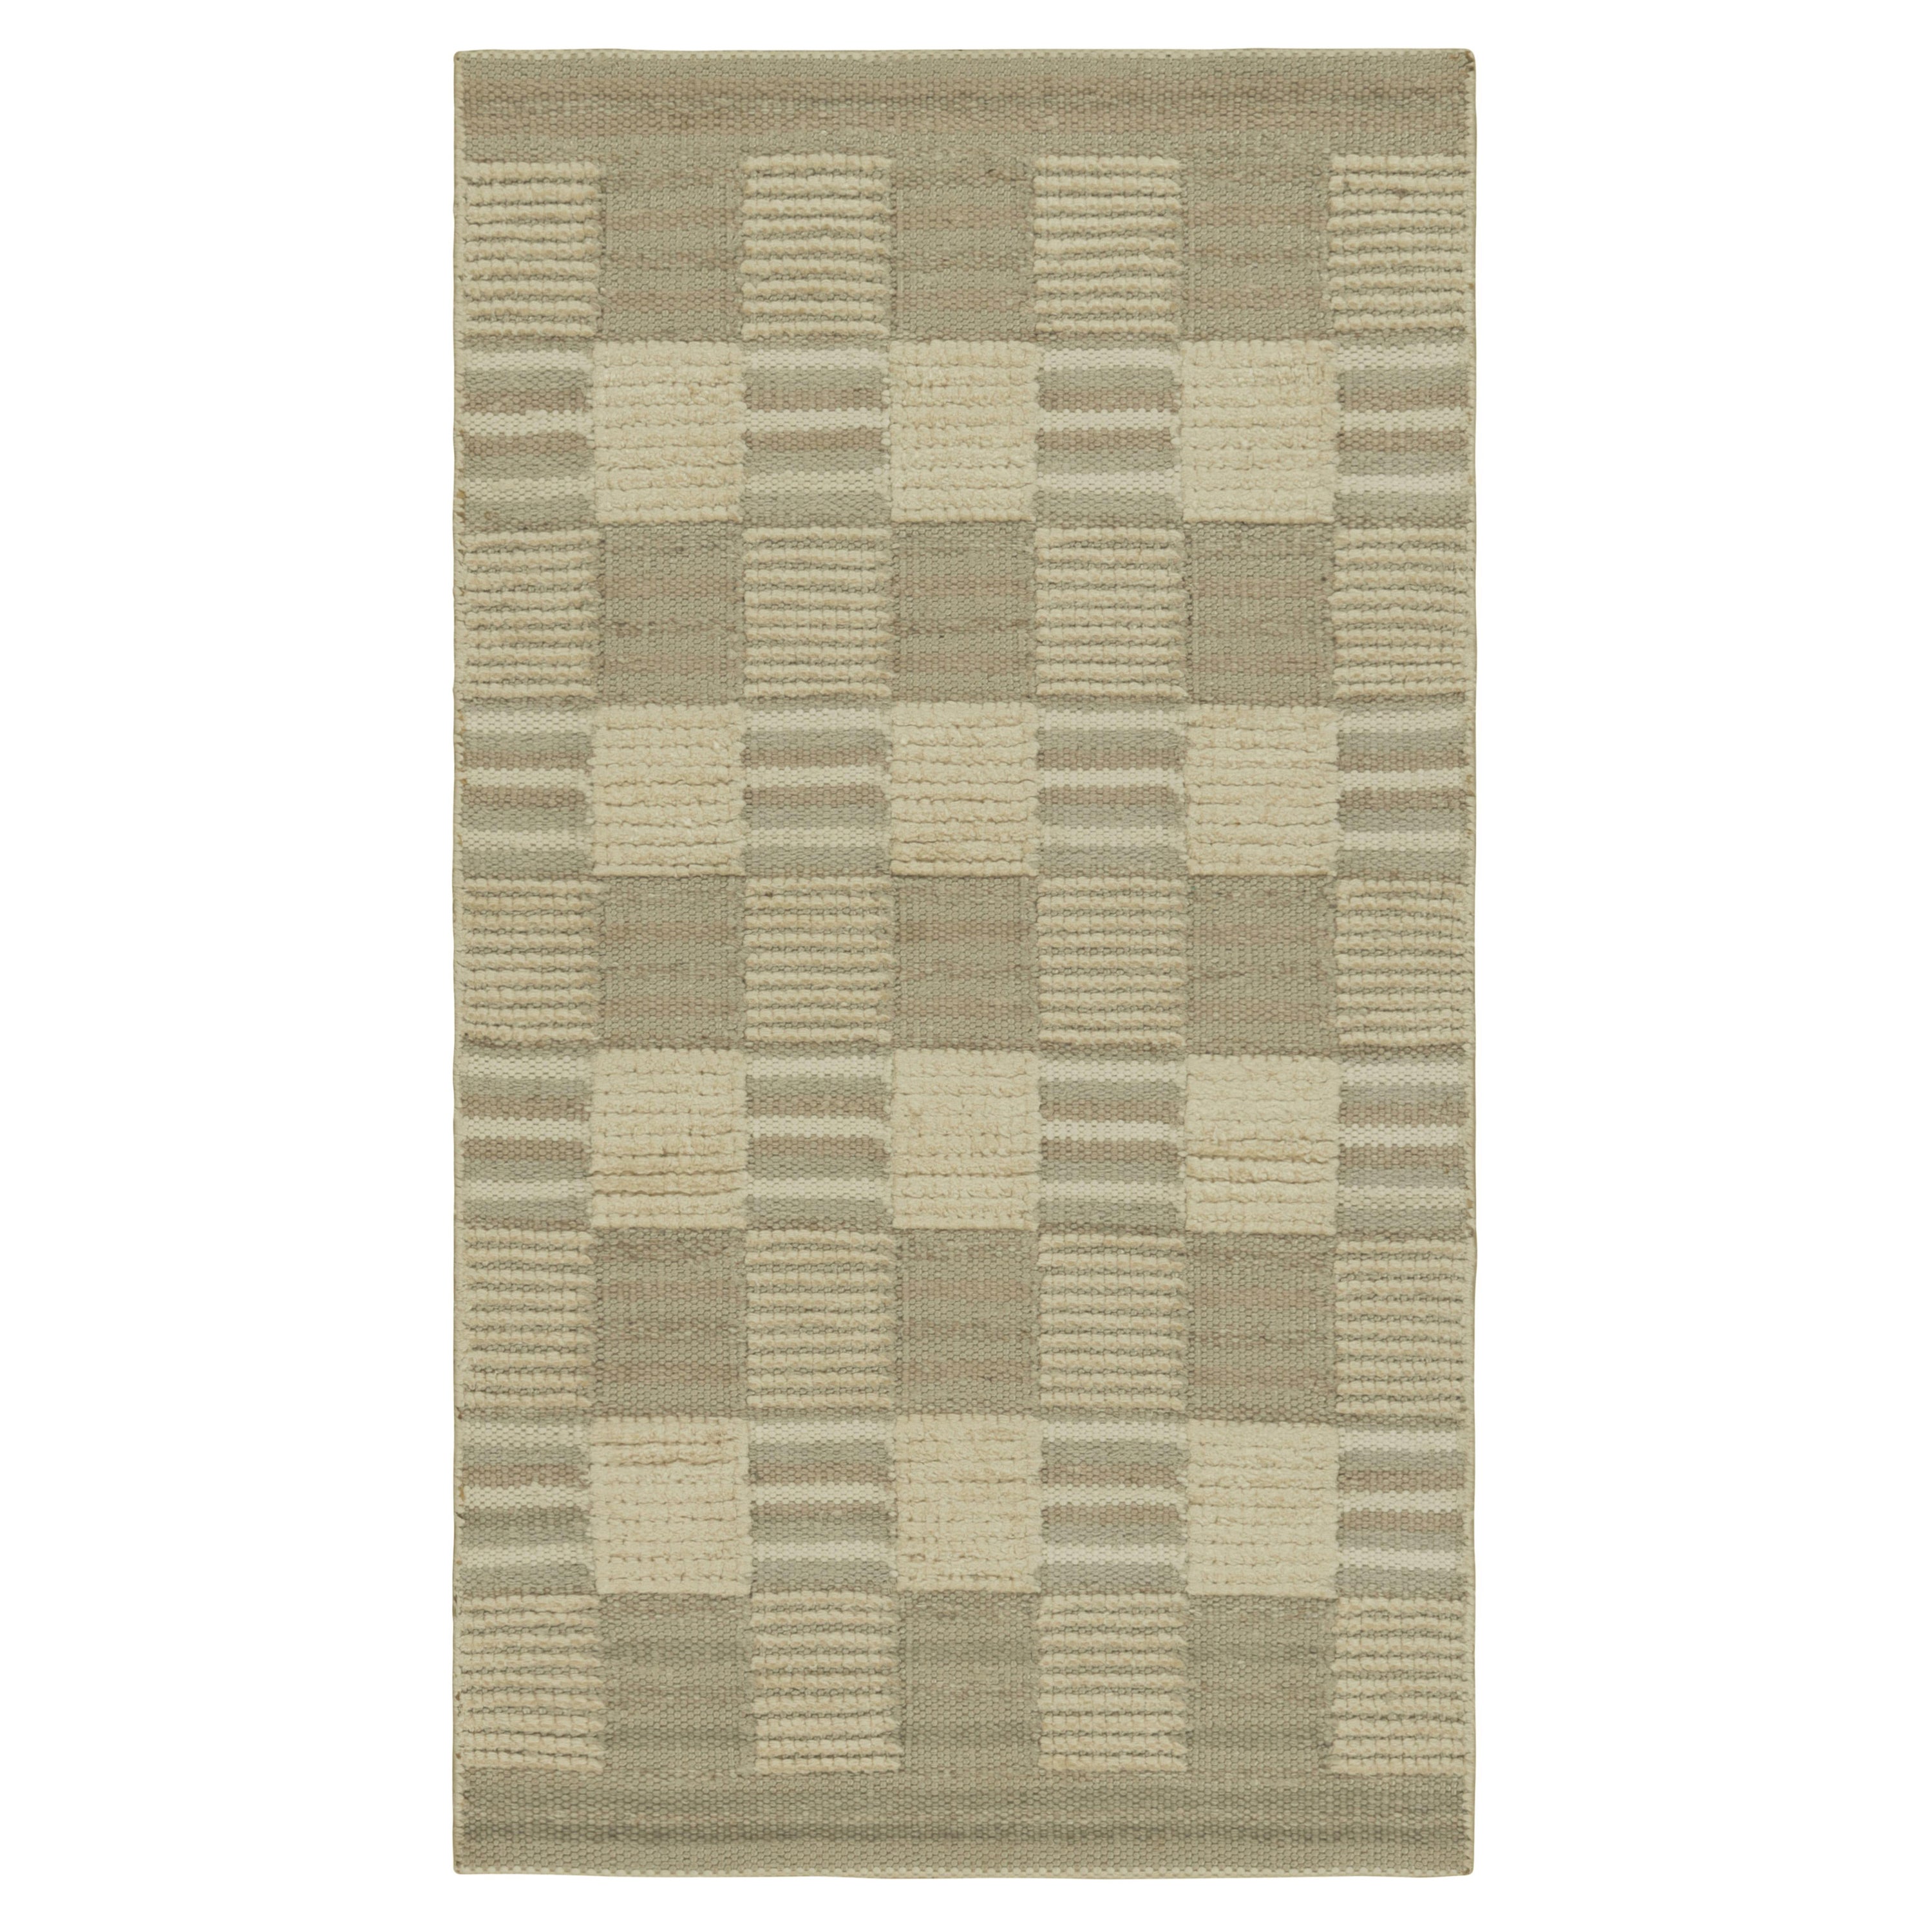 Rug & Kilim’s Scandinavian Style Rug in Blue and Beige, with Geometric Patterns